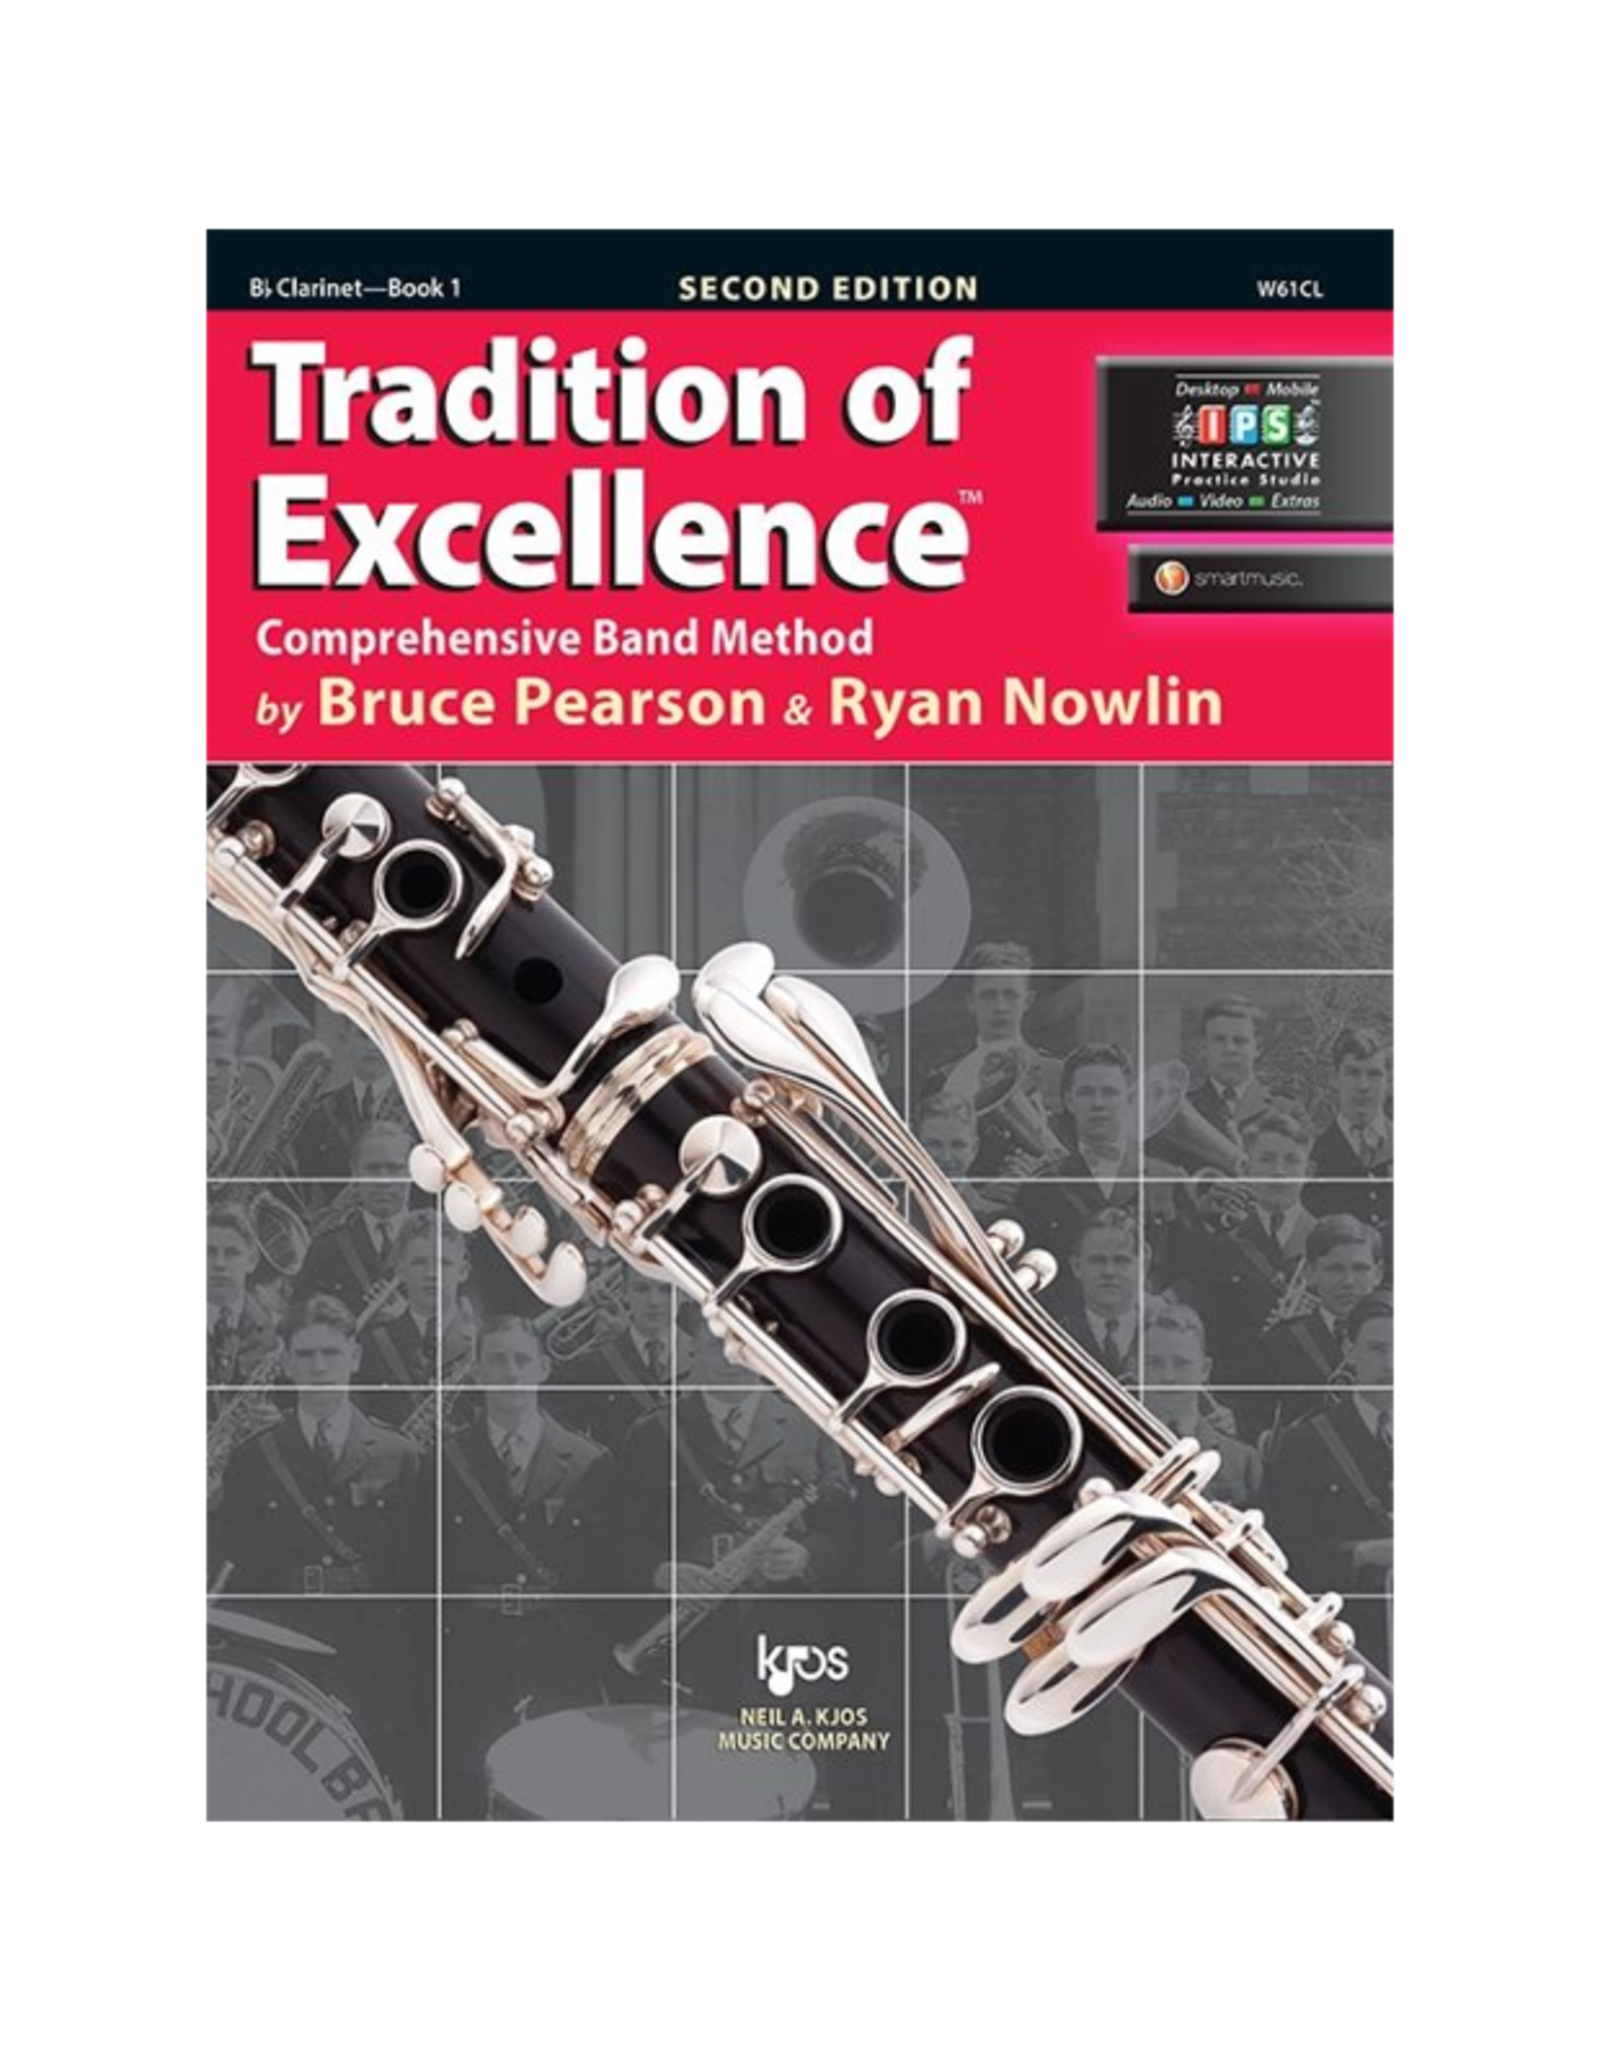 Neil A Kjos Music Company Tradition of Excellence Clarinet Book 1